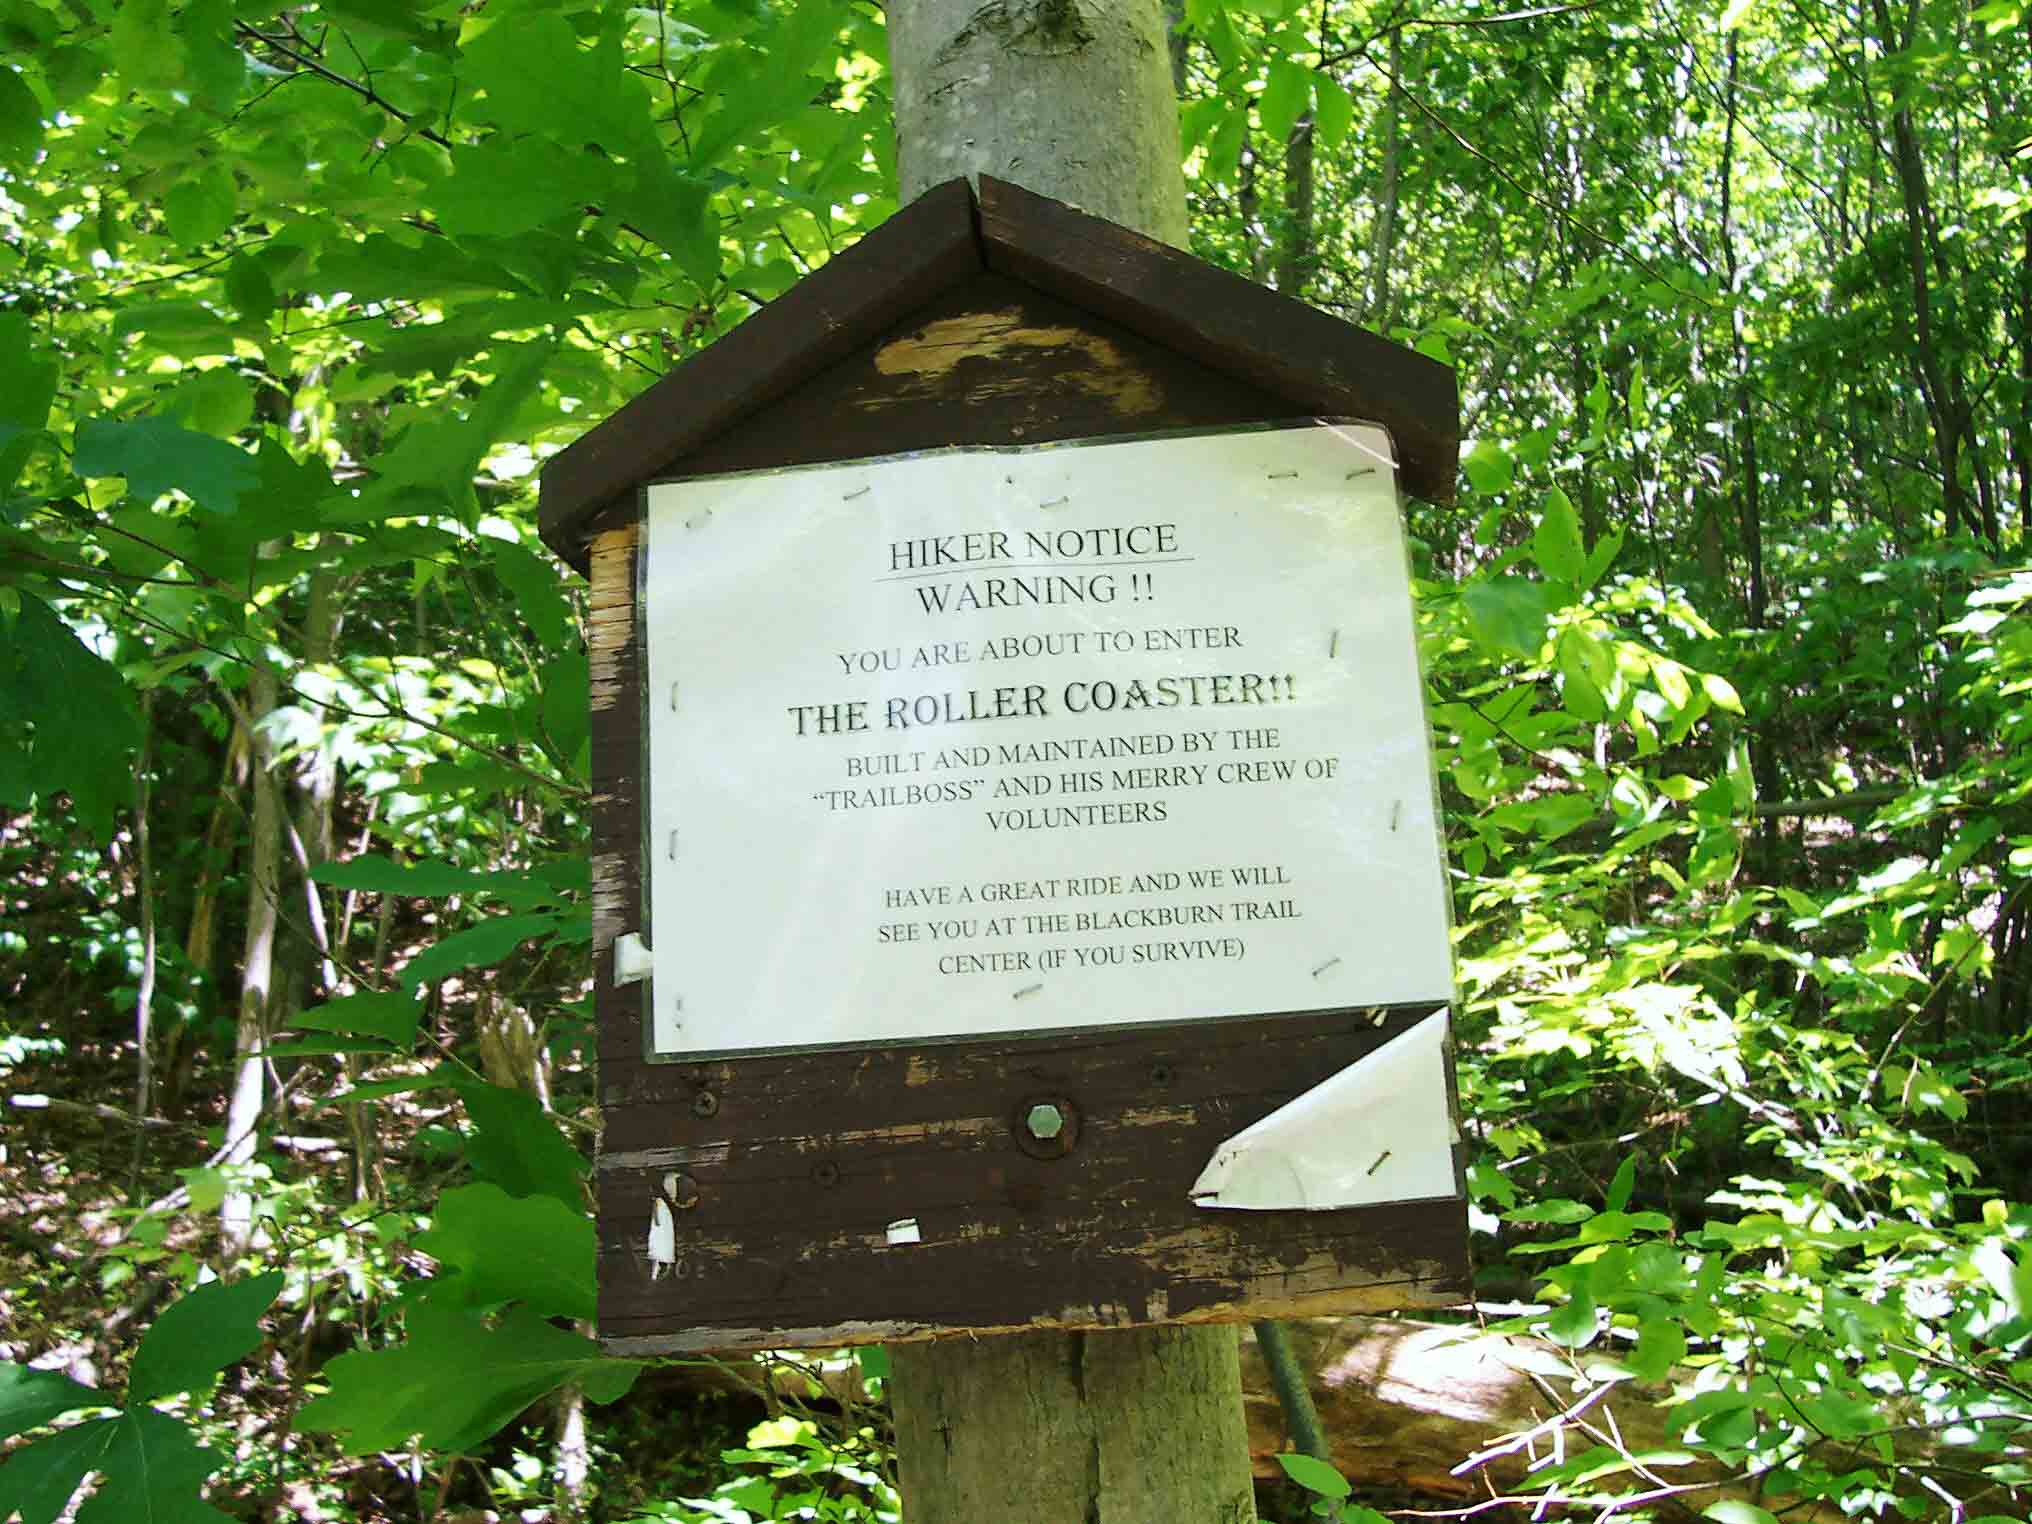 mm 10.1 - Sign at south end of 'The Rollercoaster'. Development has pushed the trail off the ridge in this area and the trail goes over 10 hills and side ridges in 13 miles, climbing and losing 300-700 feet on each one.  Courtesy dlcul@conncoll.edu